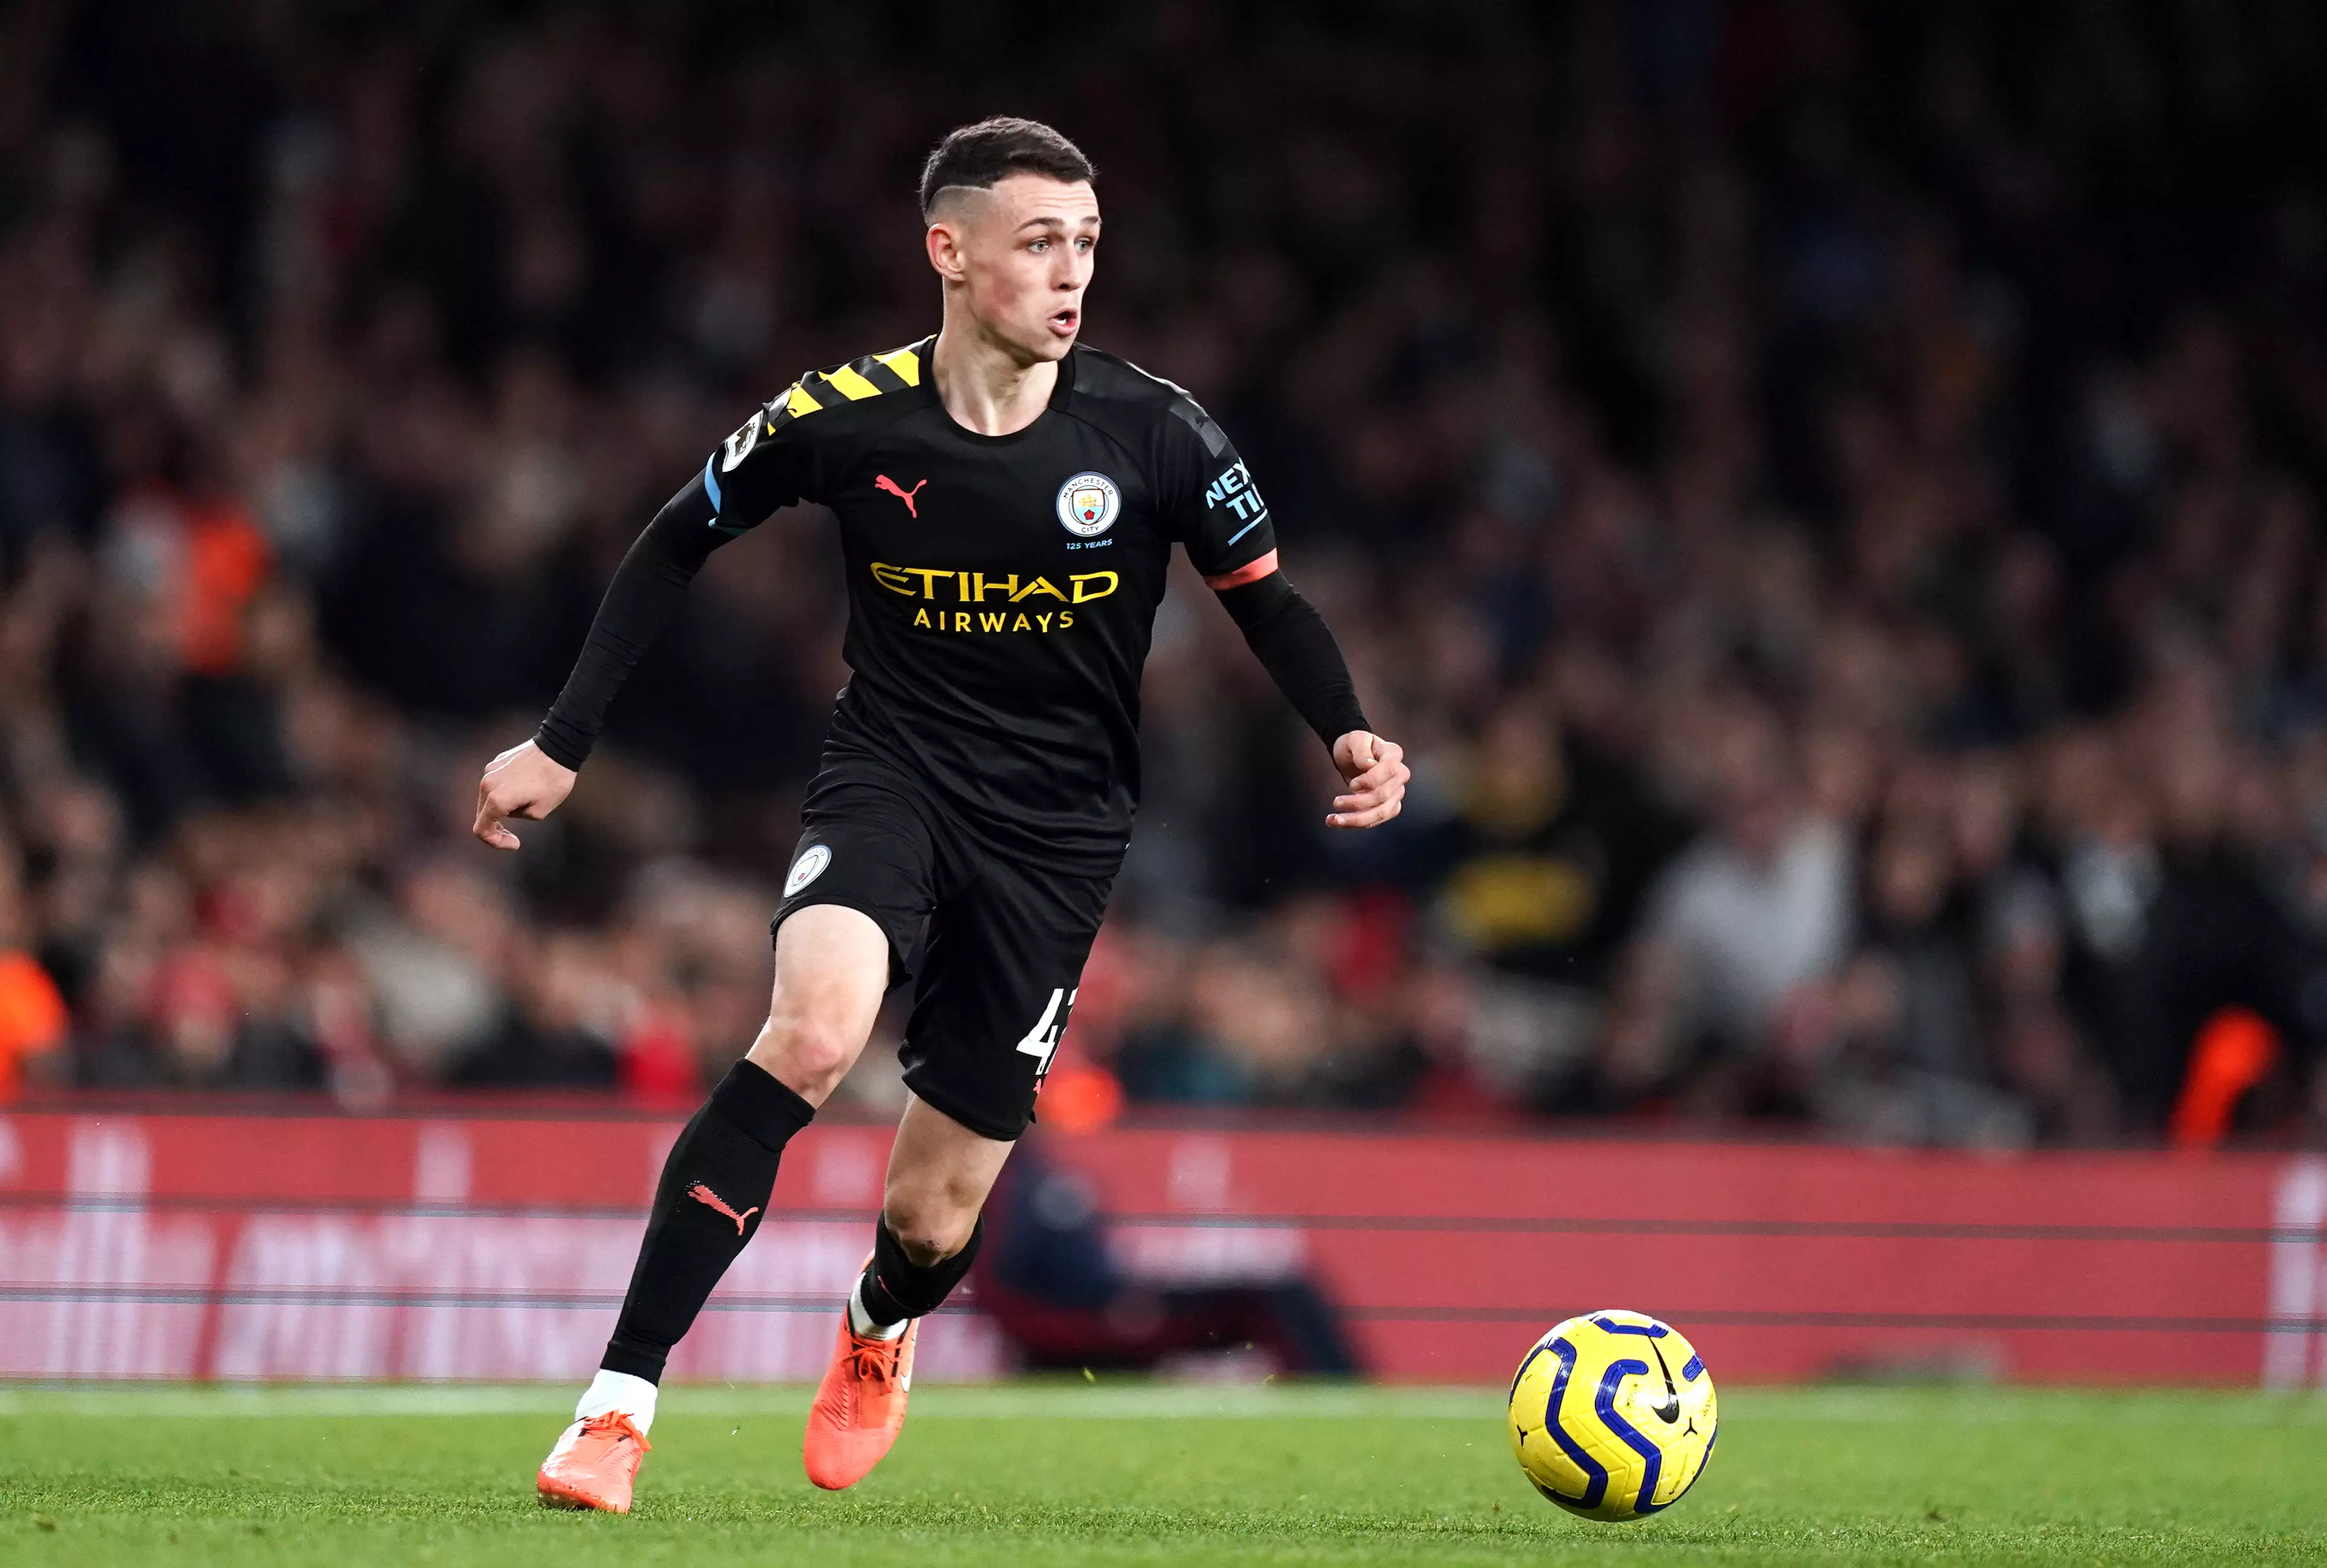 Restrictions would hopefully mean more game time for the likes of Phil Foden. Image: PA Images